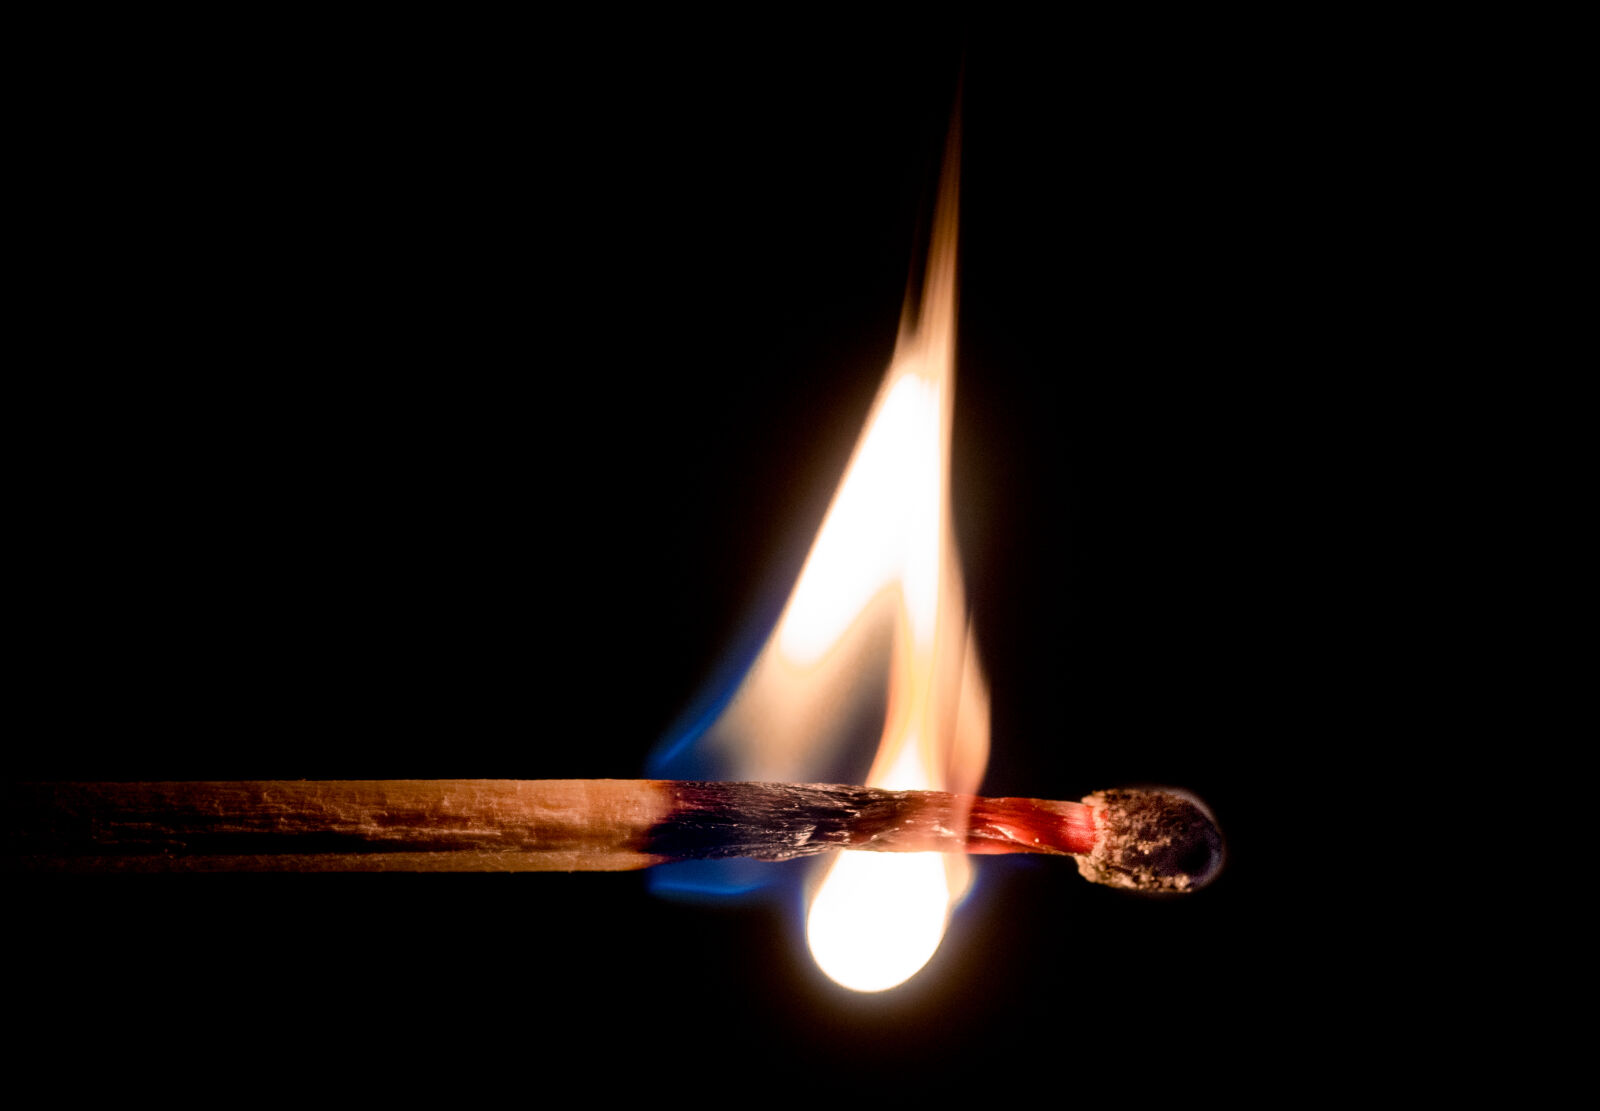 AF Micro-Nikkor 55mm f/2.8 sample photo. Wood, fire, hot, glow photography